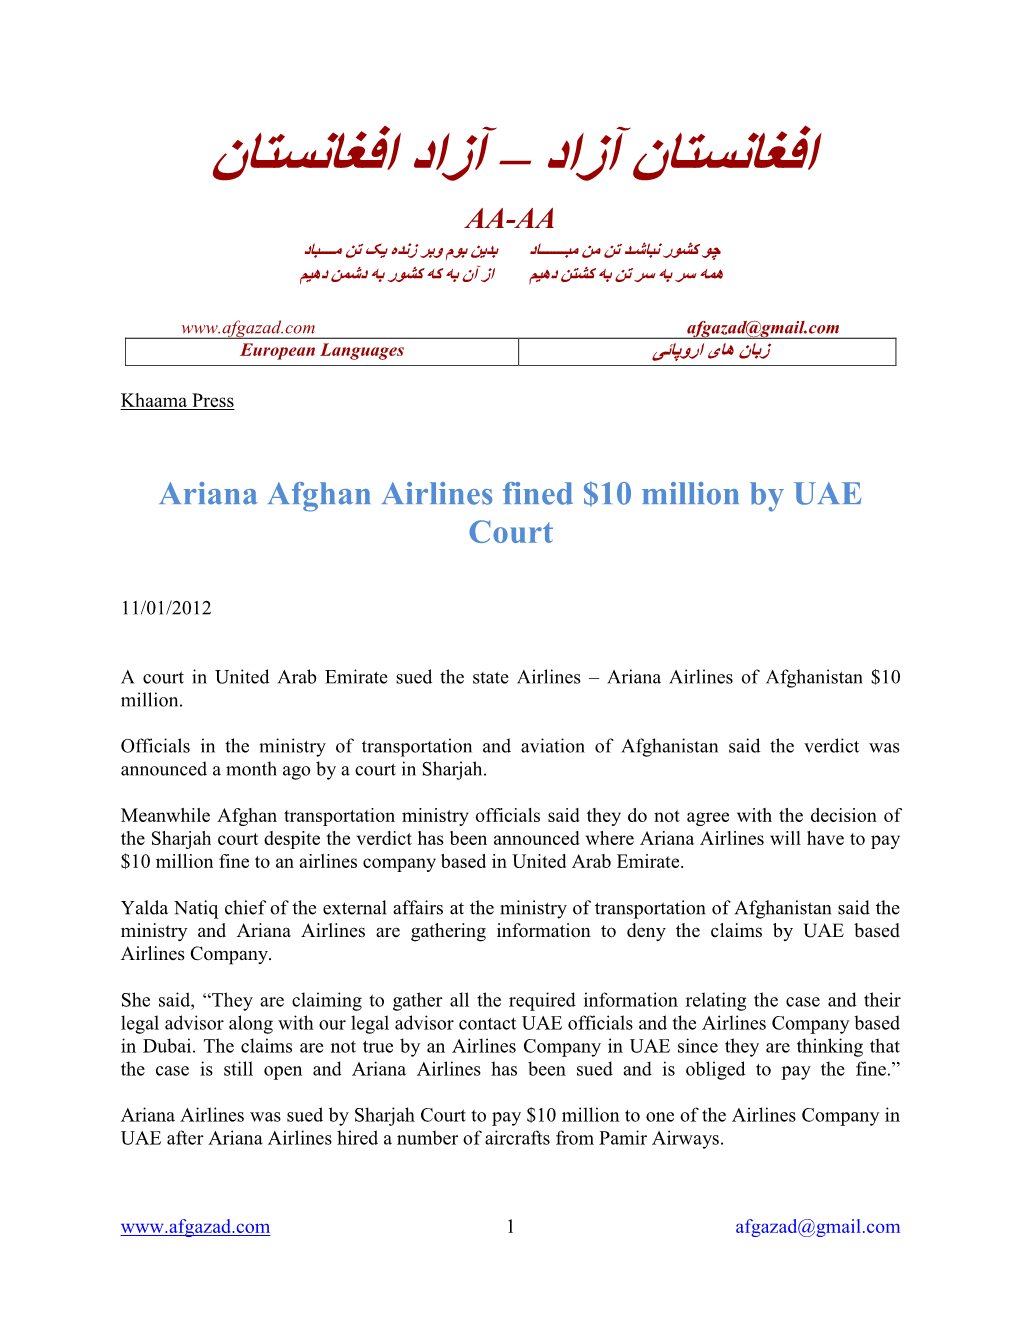 Ariana Afghan Airlines Fined $10 Million by UAE Court